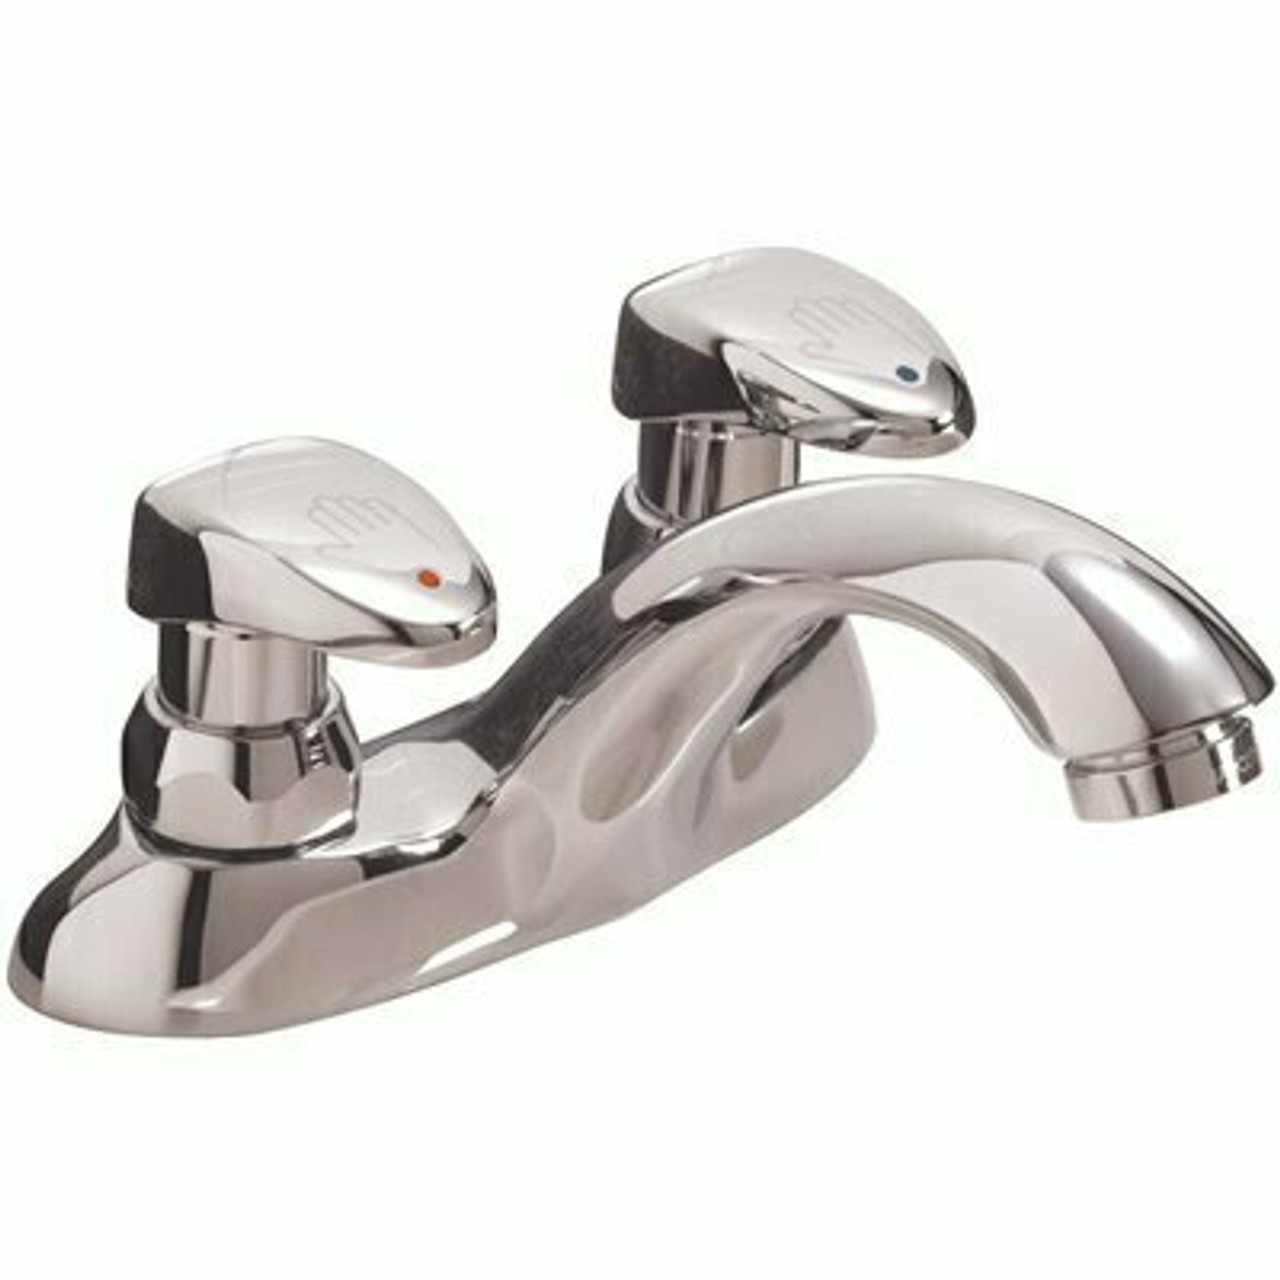 Delta Commercial 4 In. Centerset 2-Handle Bathroom Faucet In Chrome With Vandal-Resistant Handle Actuator